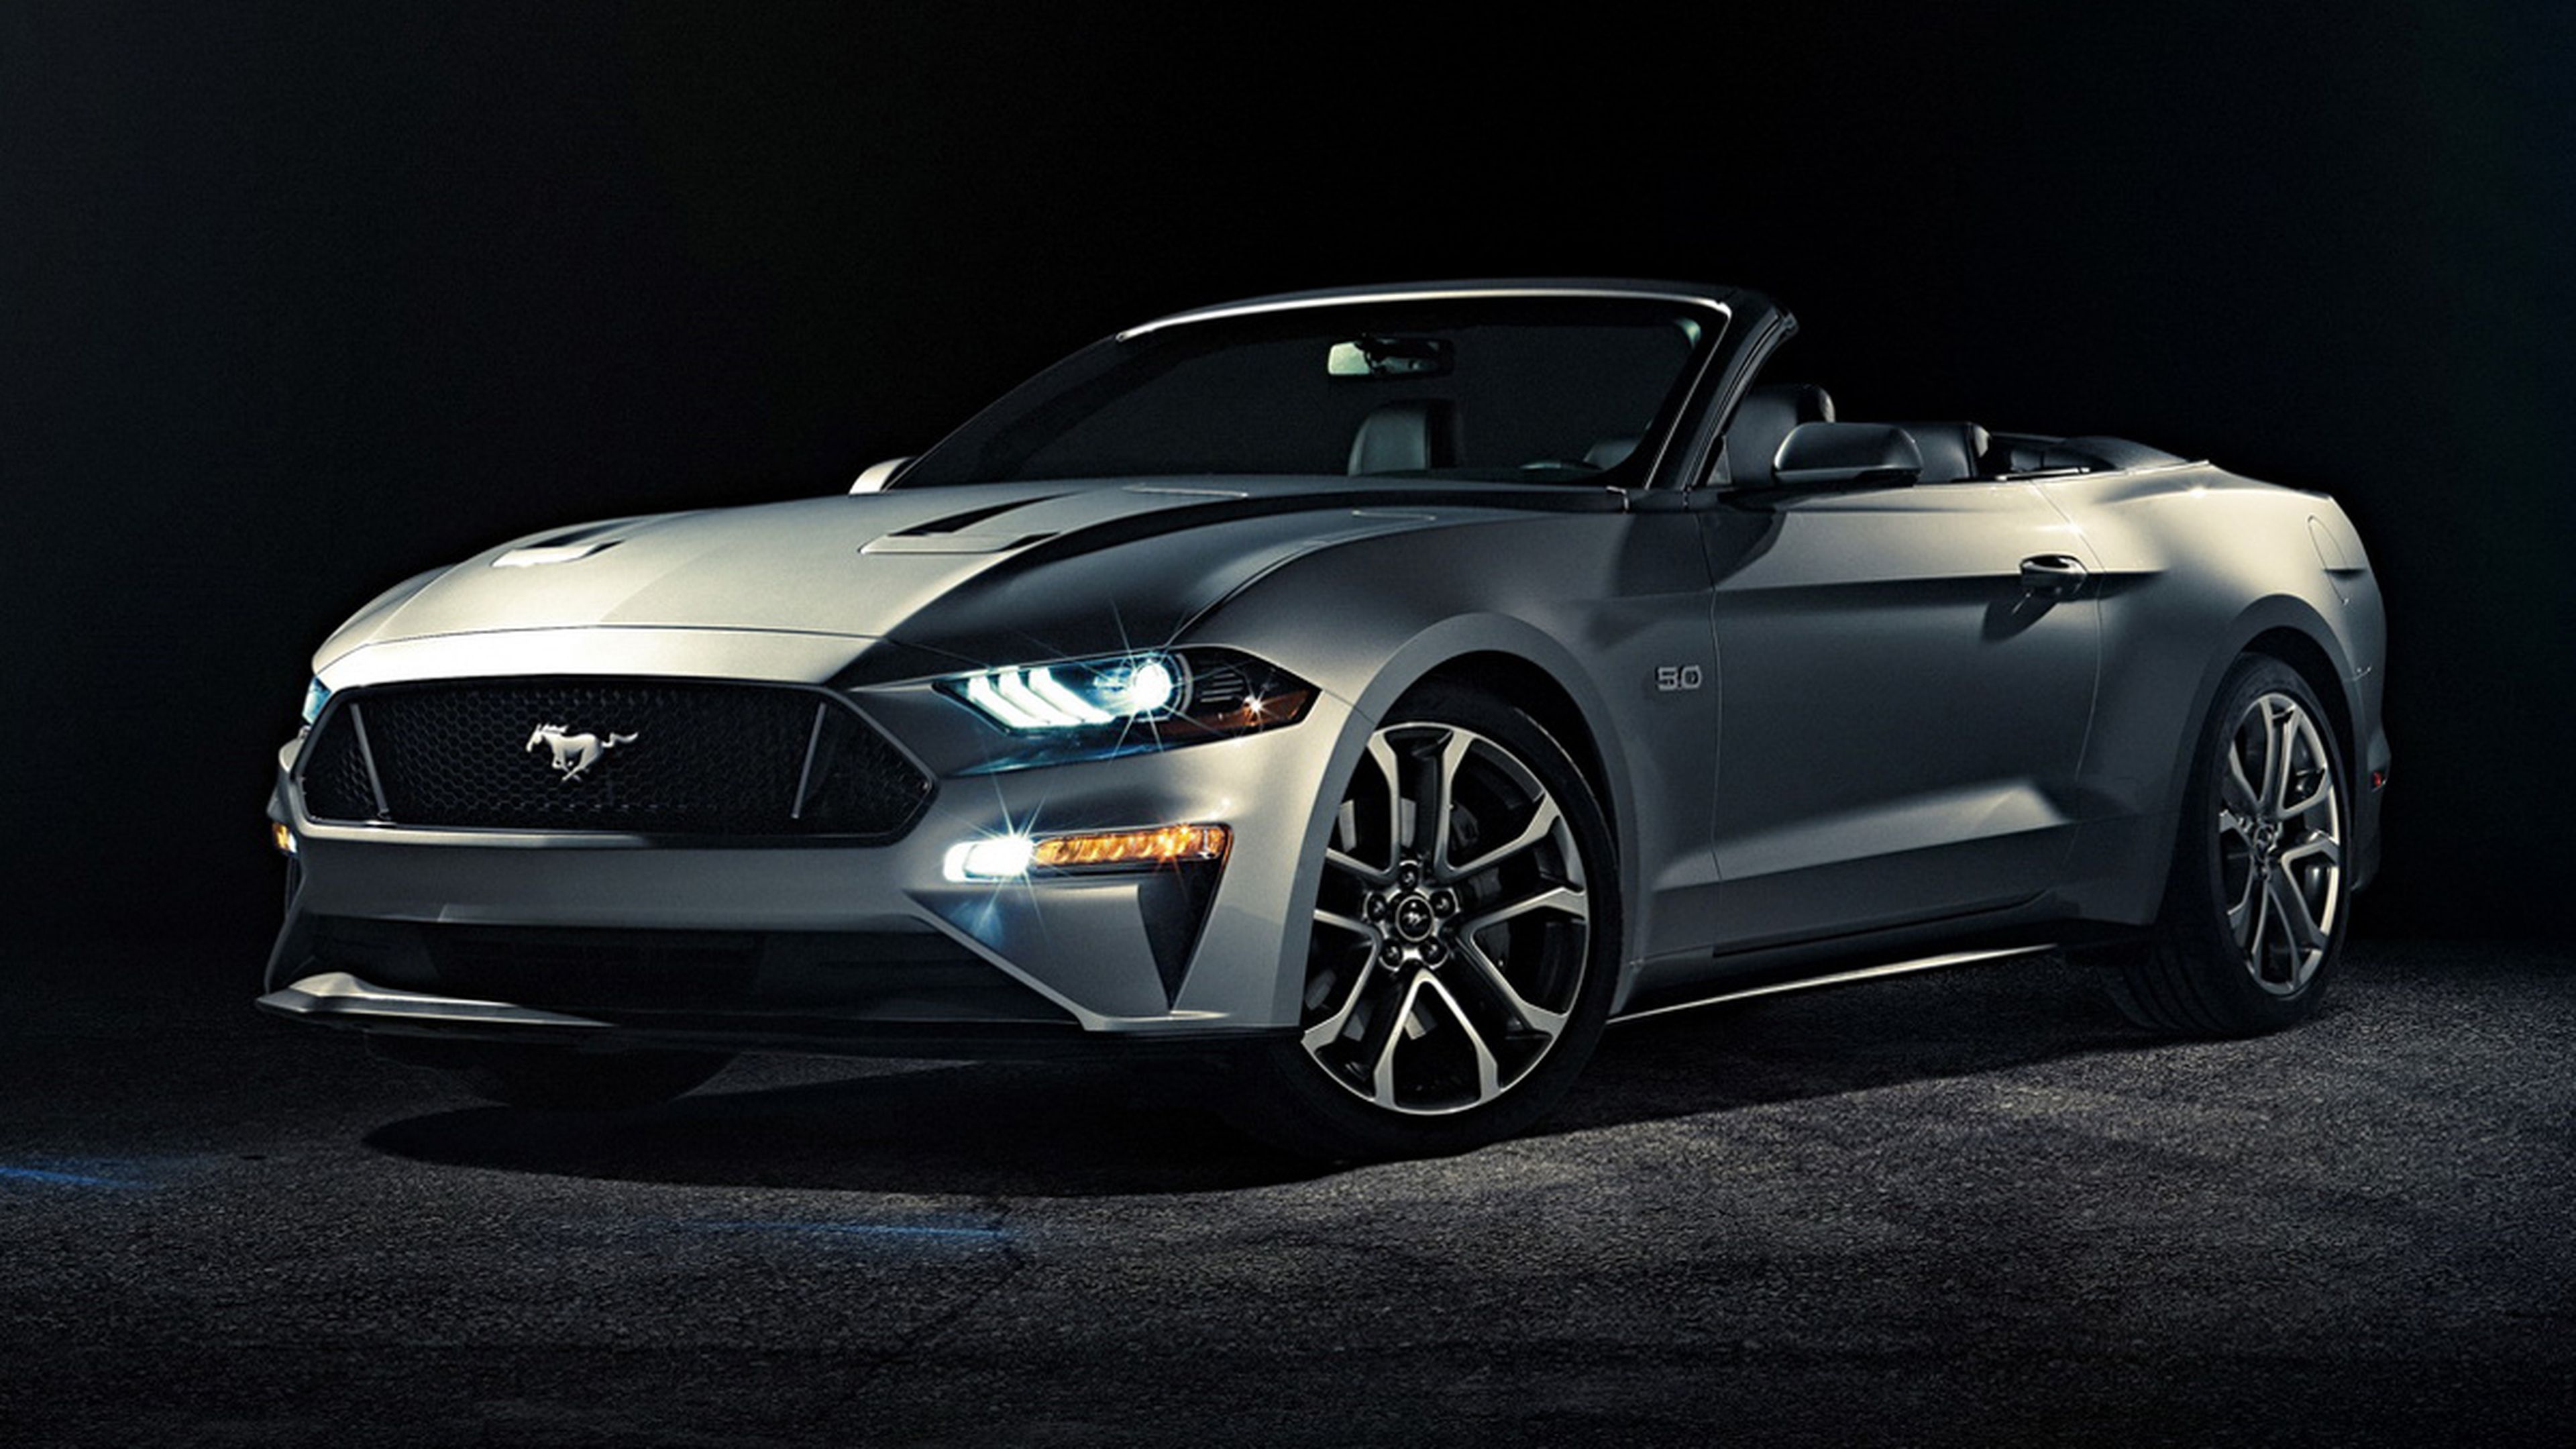 Ford Mustang Convertible 2017